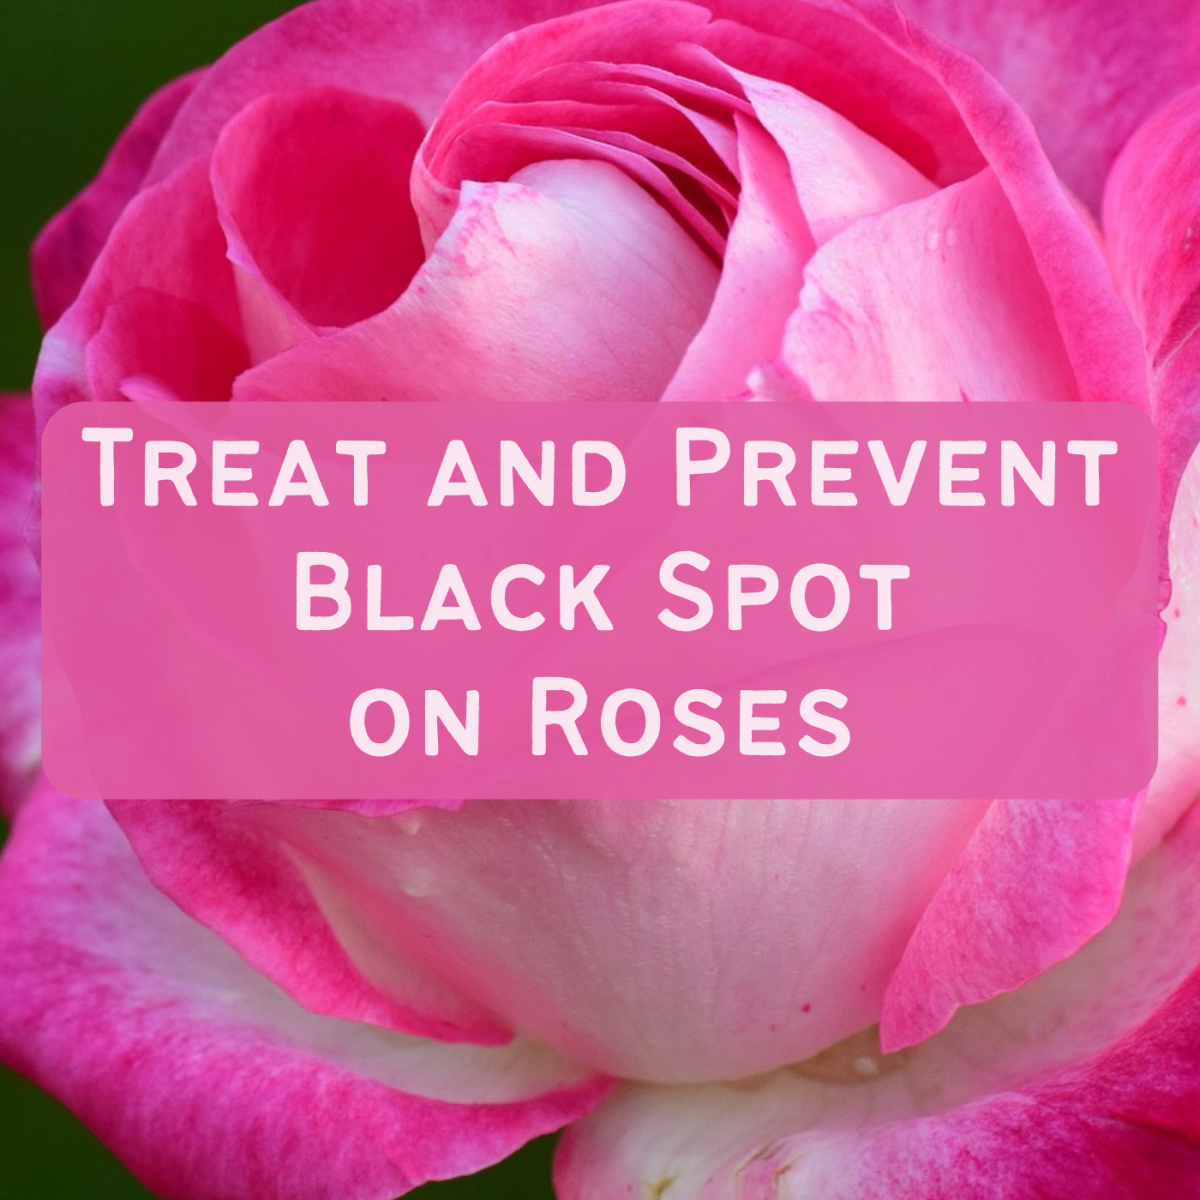 Learn how to deal with black spot on your roses, as well as how to prevent it from happening.